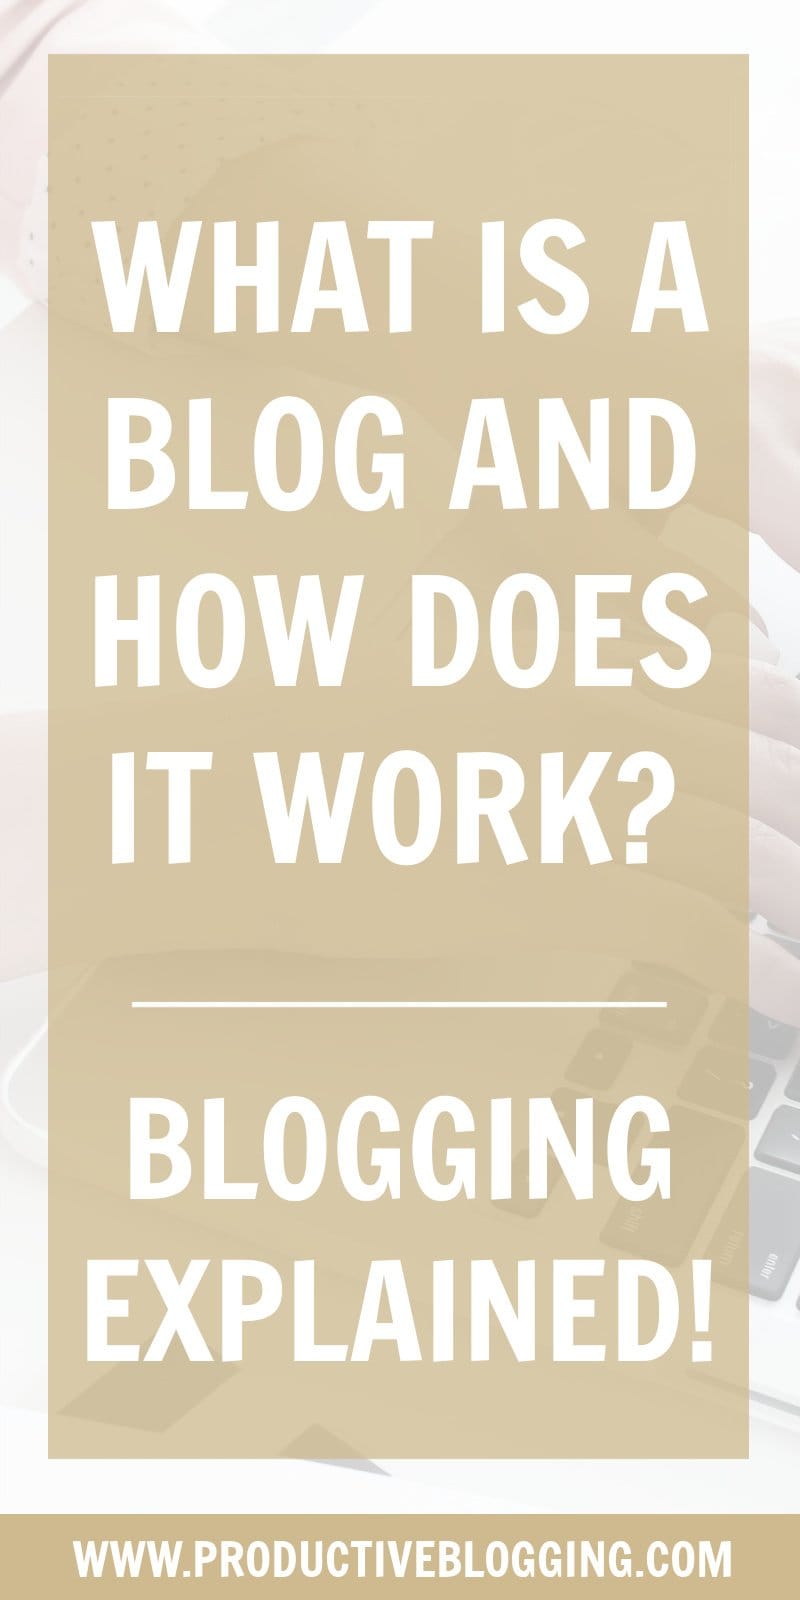 What is a blog? What is a blogger? How does blogging work? And can people really make money from blogging? Everything you ever wanted to know about blogging is explained in this article! #whatisablog #bloggingexplained #startablog #makemoneyblogging #moneymakingblog #profitableblog #contentmarketing #blogginglife #bloglife #blog #blogging #blogger #bloggersofIG #professionalblogger #bloggingismyjob #solopreneur #mompreneur #fempreneur #bloggingbiz #bloggingtips #productiveblogging 